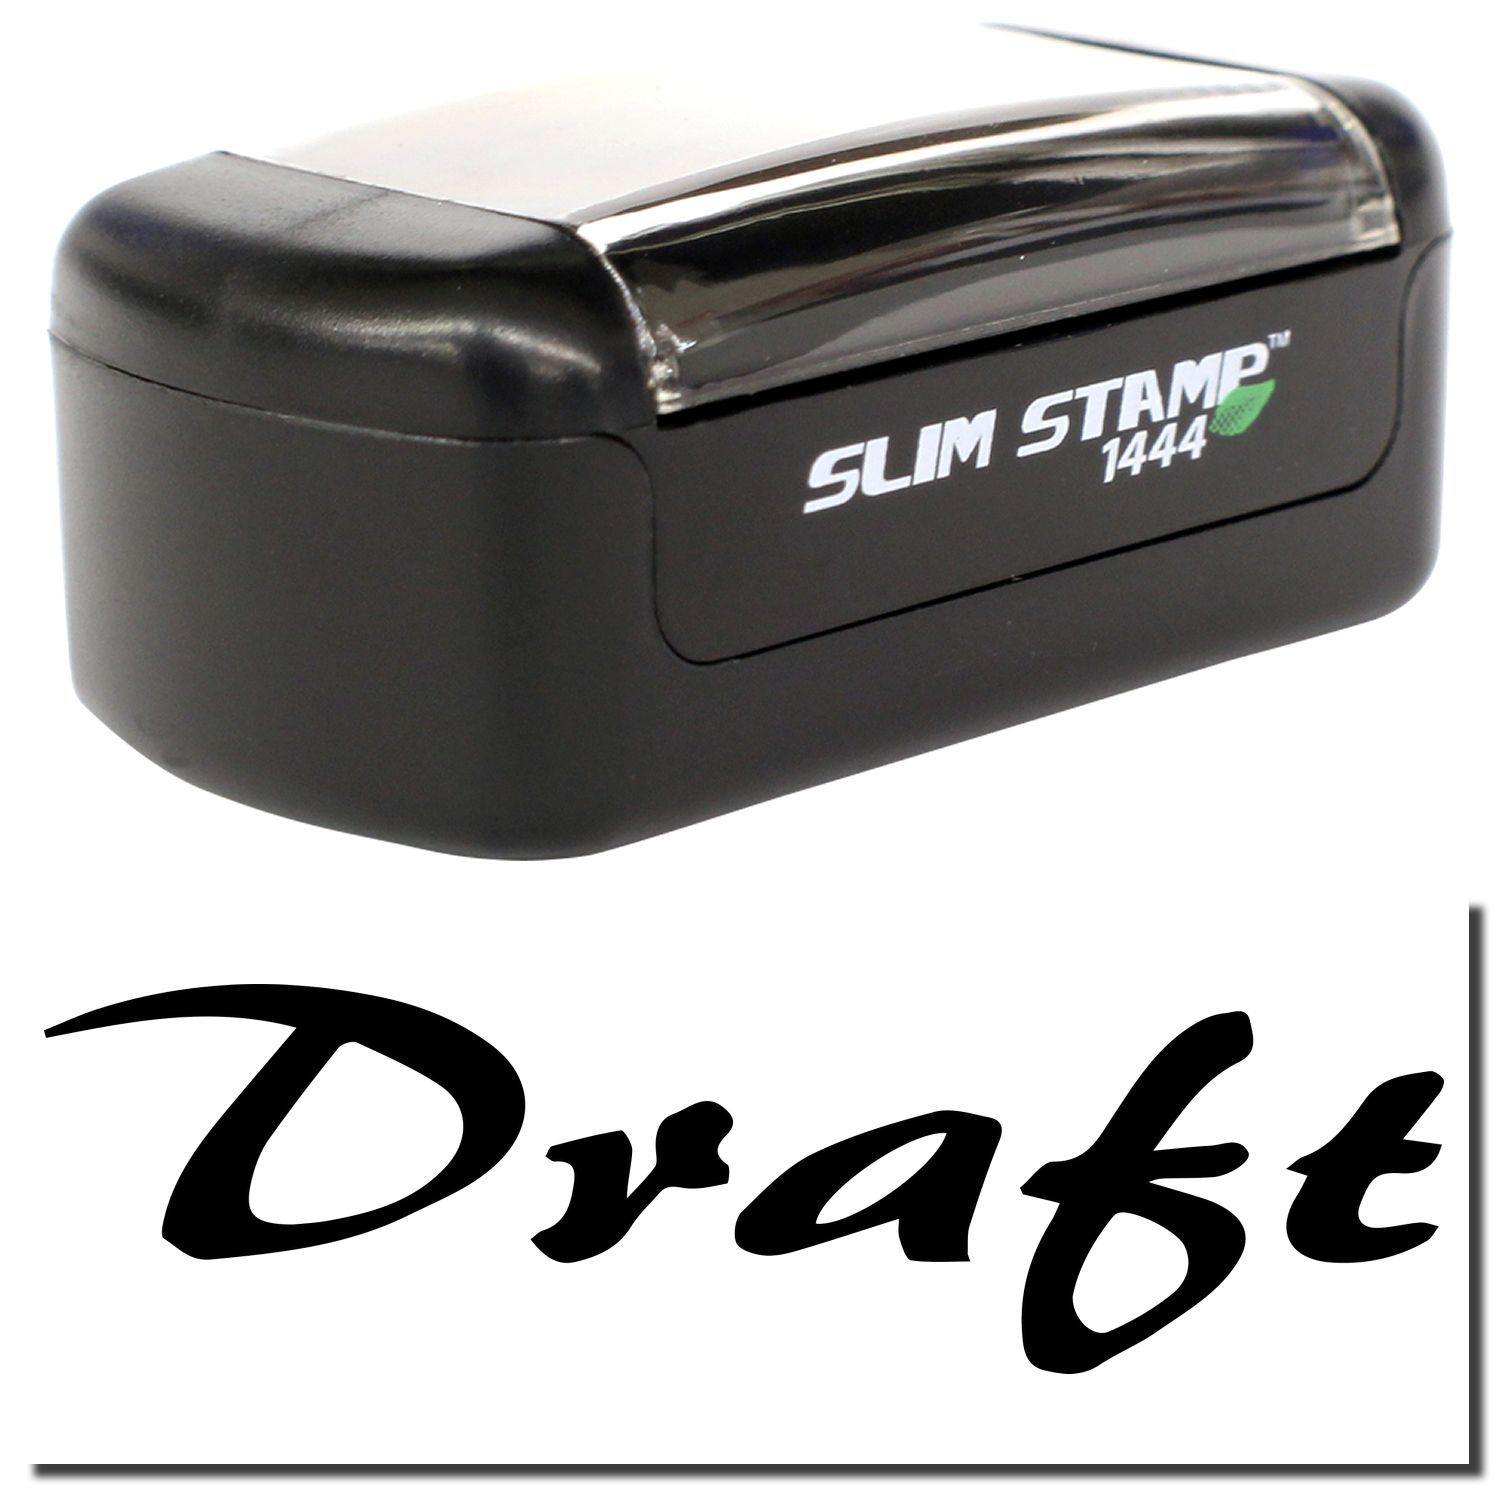 A stock office pre-inked stamp with a stamped image showing how the text "Draft" in a cursive font is displayed after stamping.